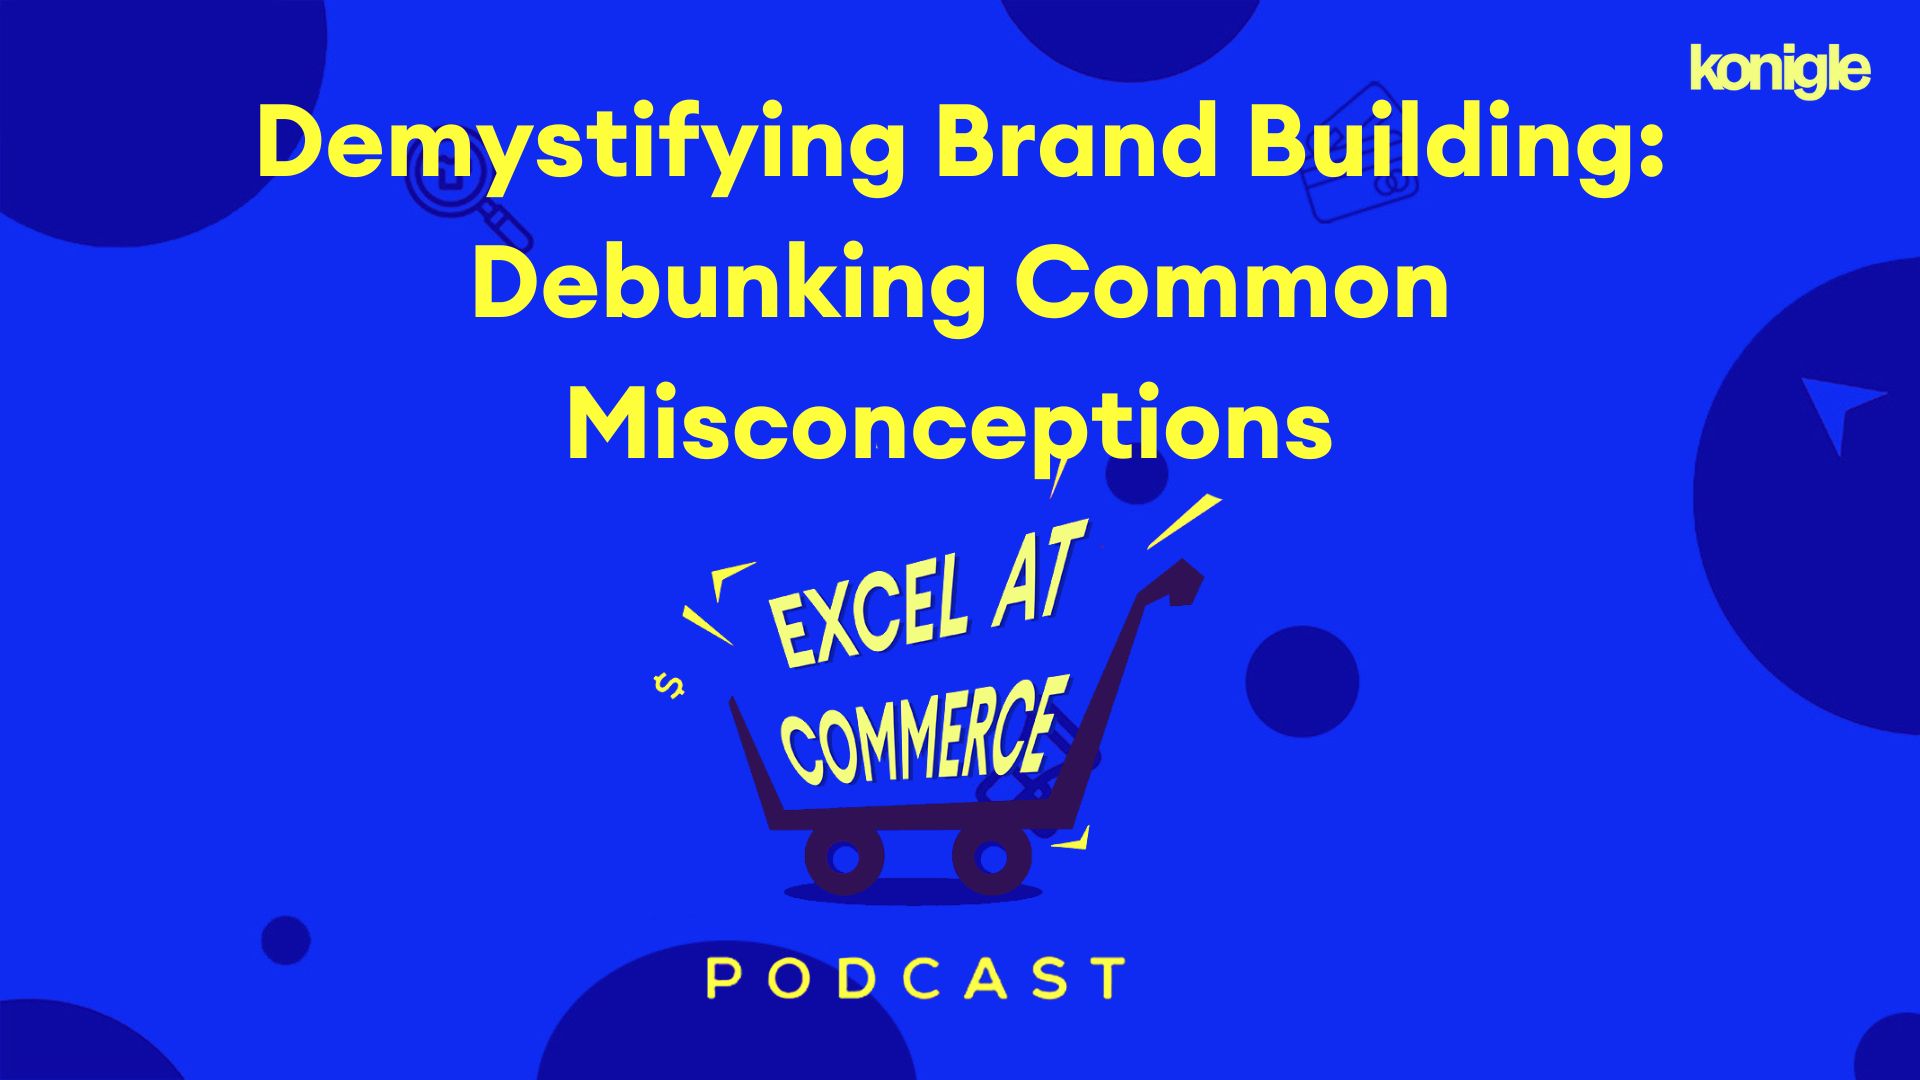 Demystifying Brand Building: Debunking Common Misconceptions